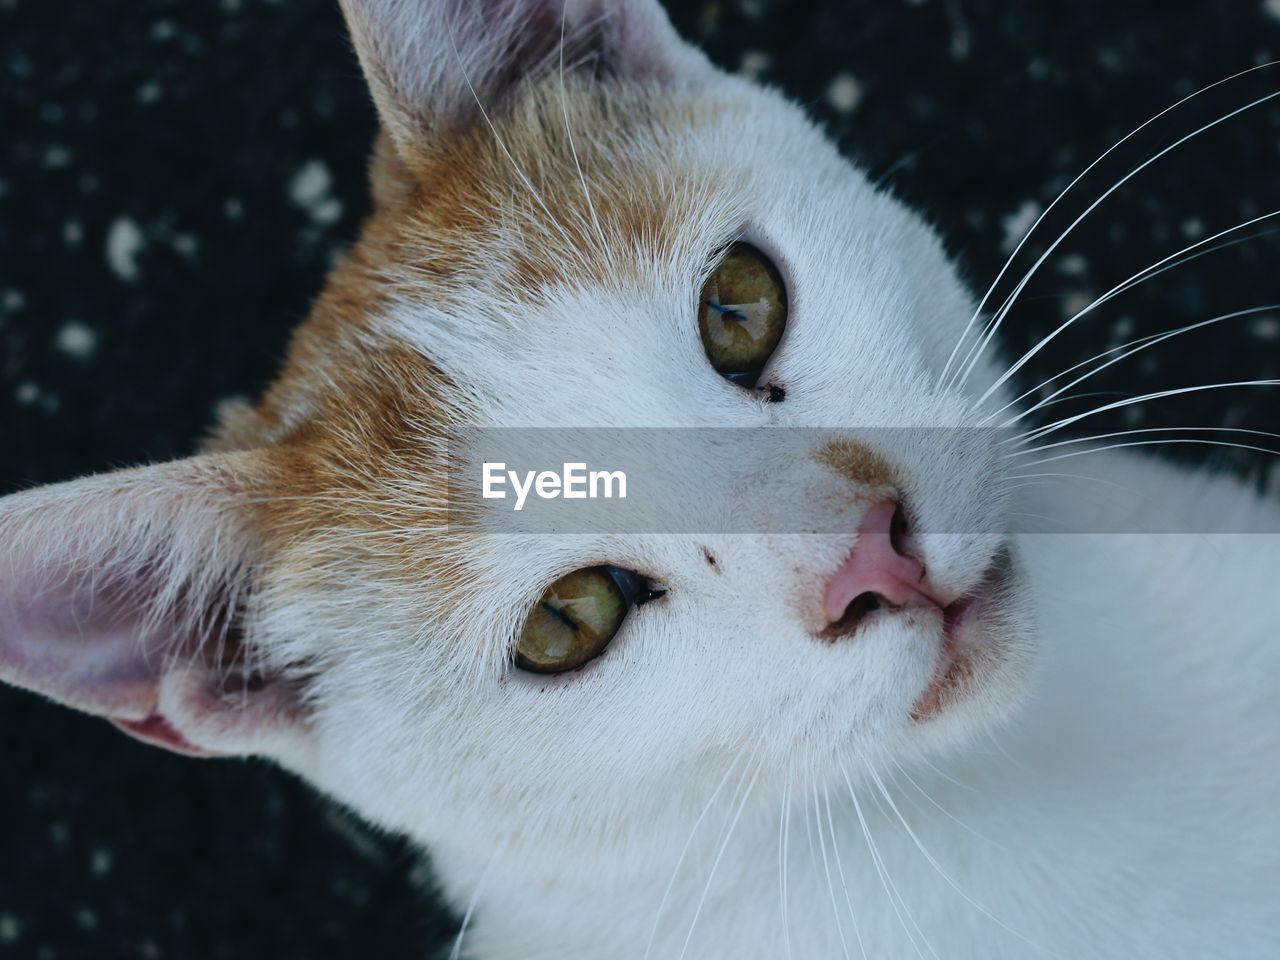 animal themes, animal, cat, mammal, one animal, pet, domestic animals, nose, domestic cat, feline, close-up, whiskers, animal body part, animal head, small to medium-sized cats, portrait, felidae, eye, animal eye, no people, white, looking at camera, animal hair, looking, carnivore, cute